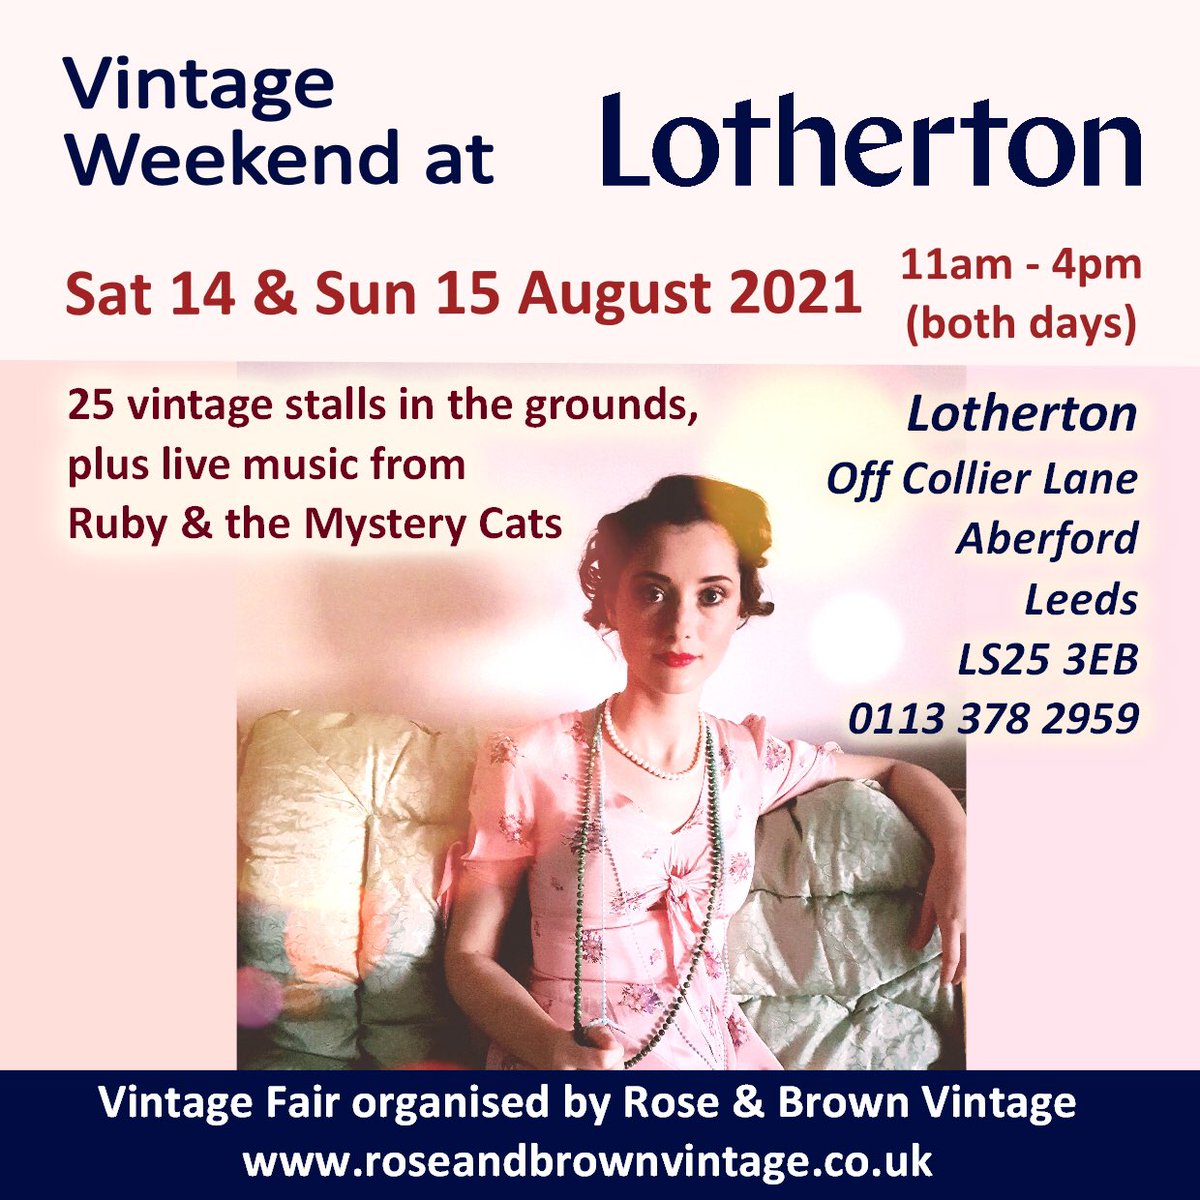 Have you got this wonderful @RoseandBrown #vintageweekend in your diary?

Book your tickets from @LeedsMuseums for @LothertonHall 

my.leedstickethub.co.uk/events/58?view…
👇👇👇